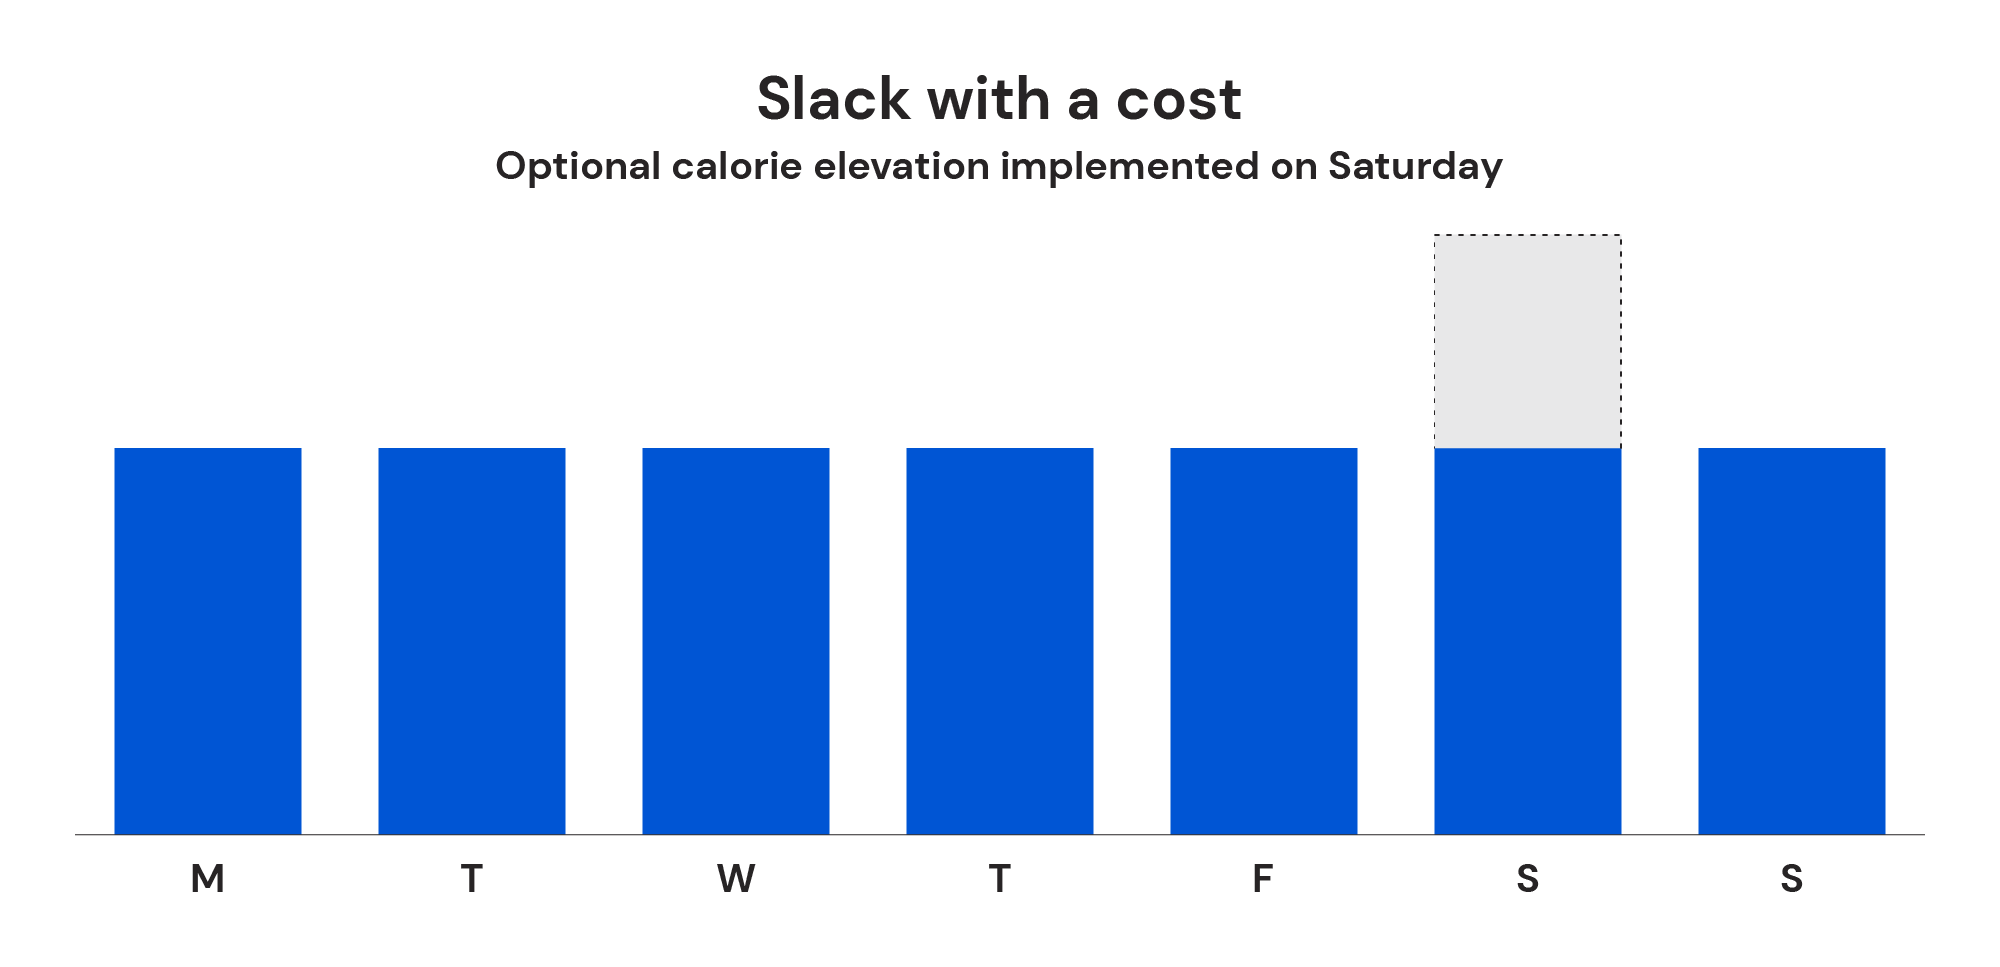 An example of “slack with a cost” implementation, in which the dieter consumes their entire calorie reserve on a Saturday.